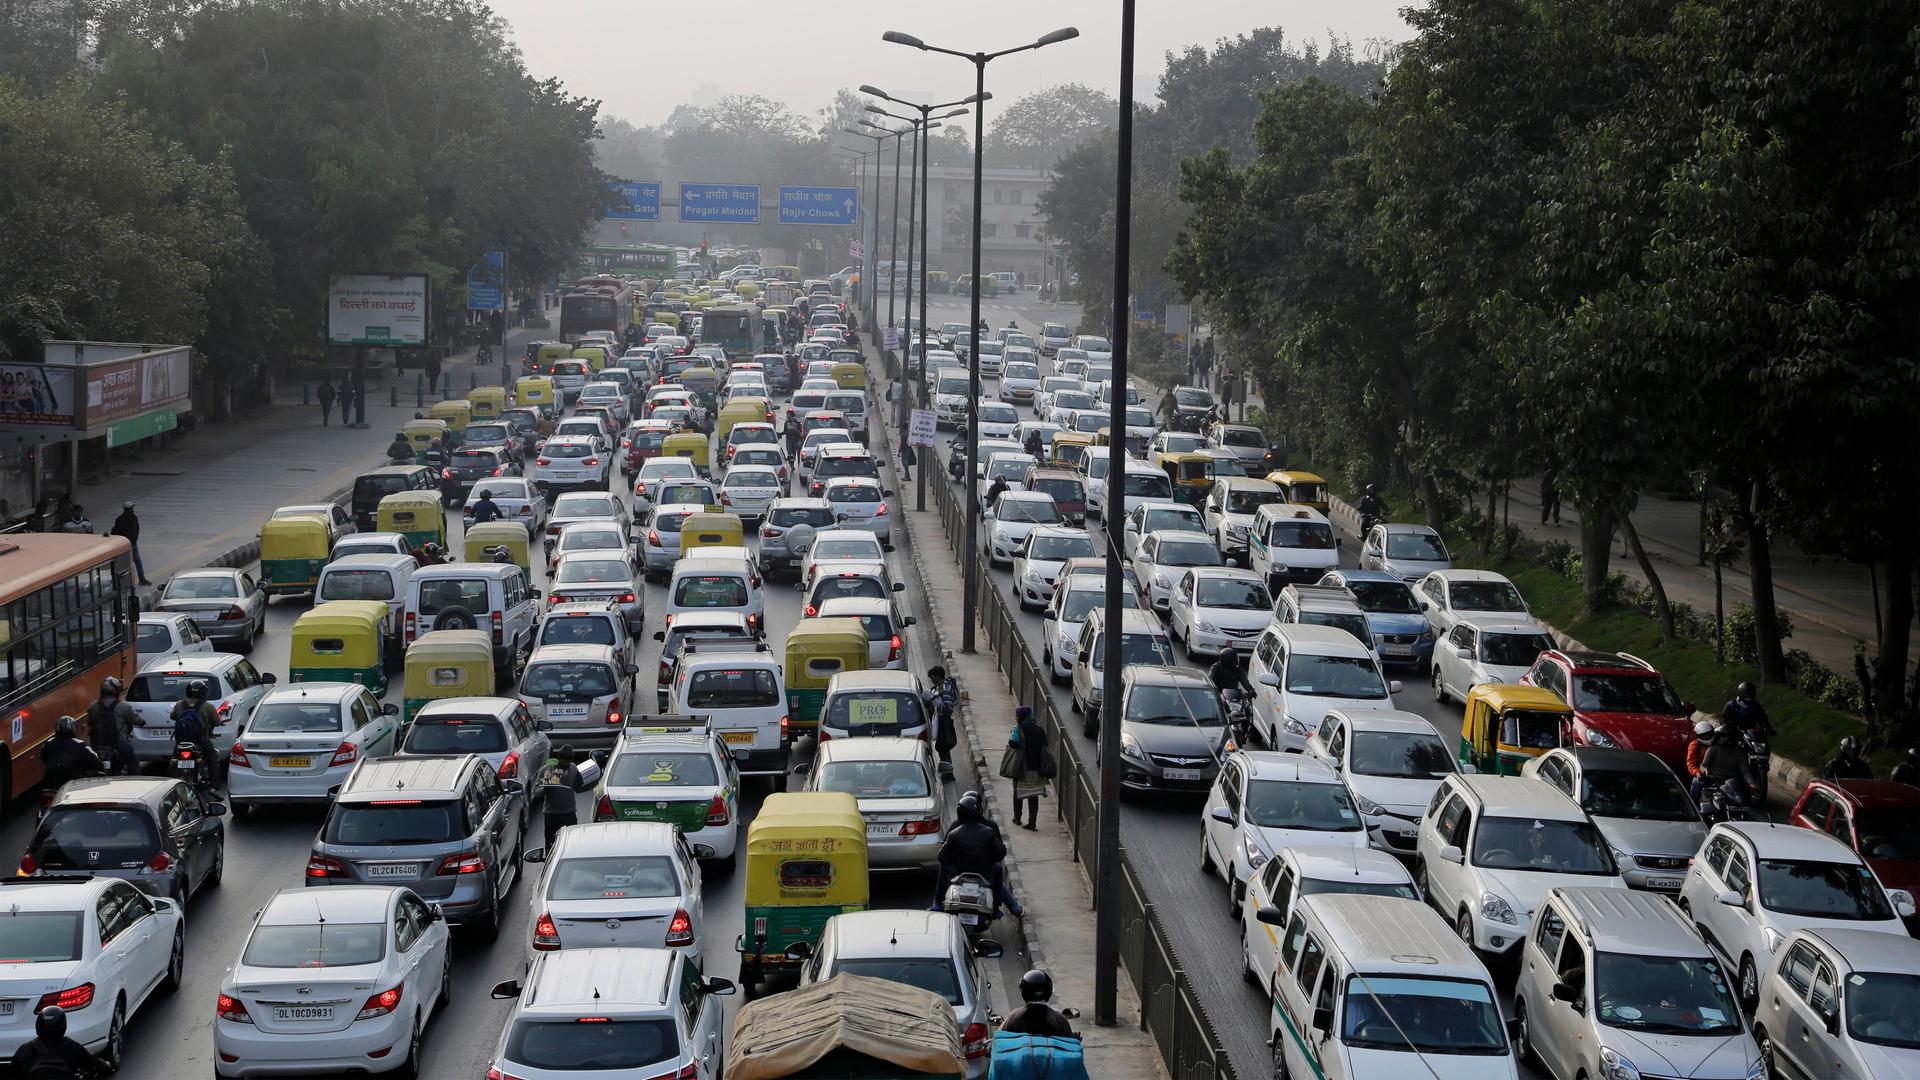 Vehicles move slowly through a traffic intersection after the end of a two-week experiment to reduce the number of cars to fight pollution in in New Delhi, India